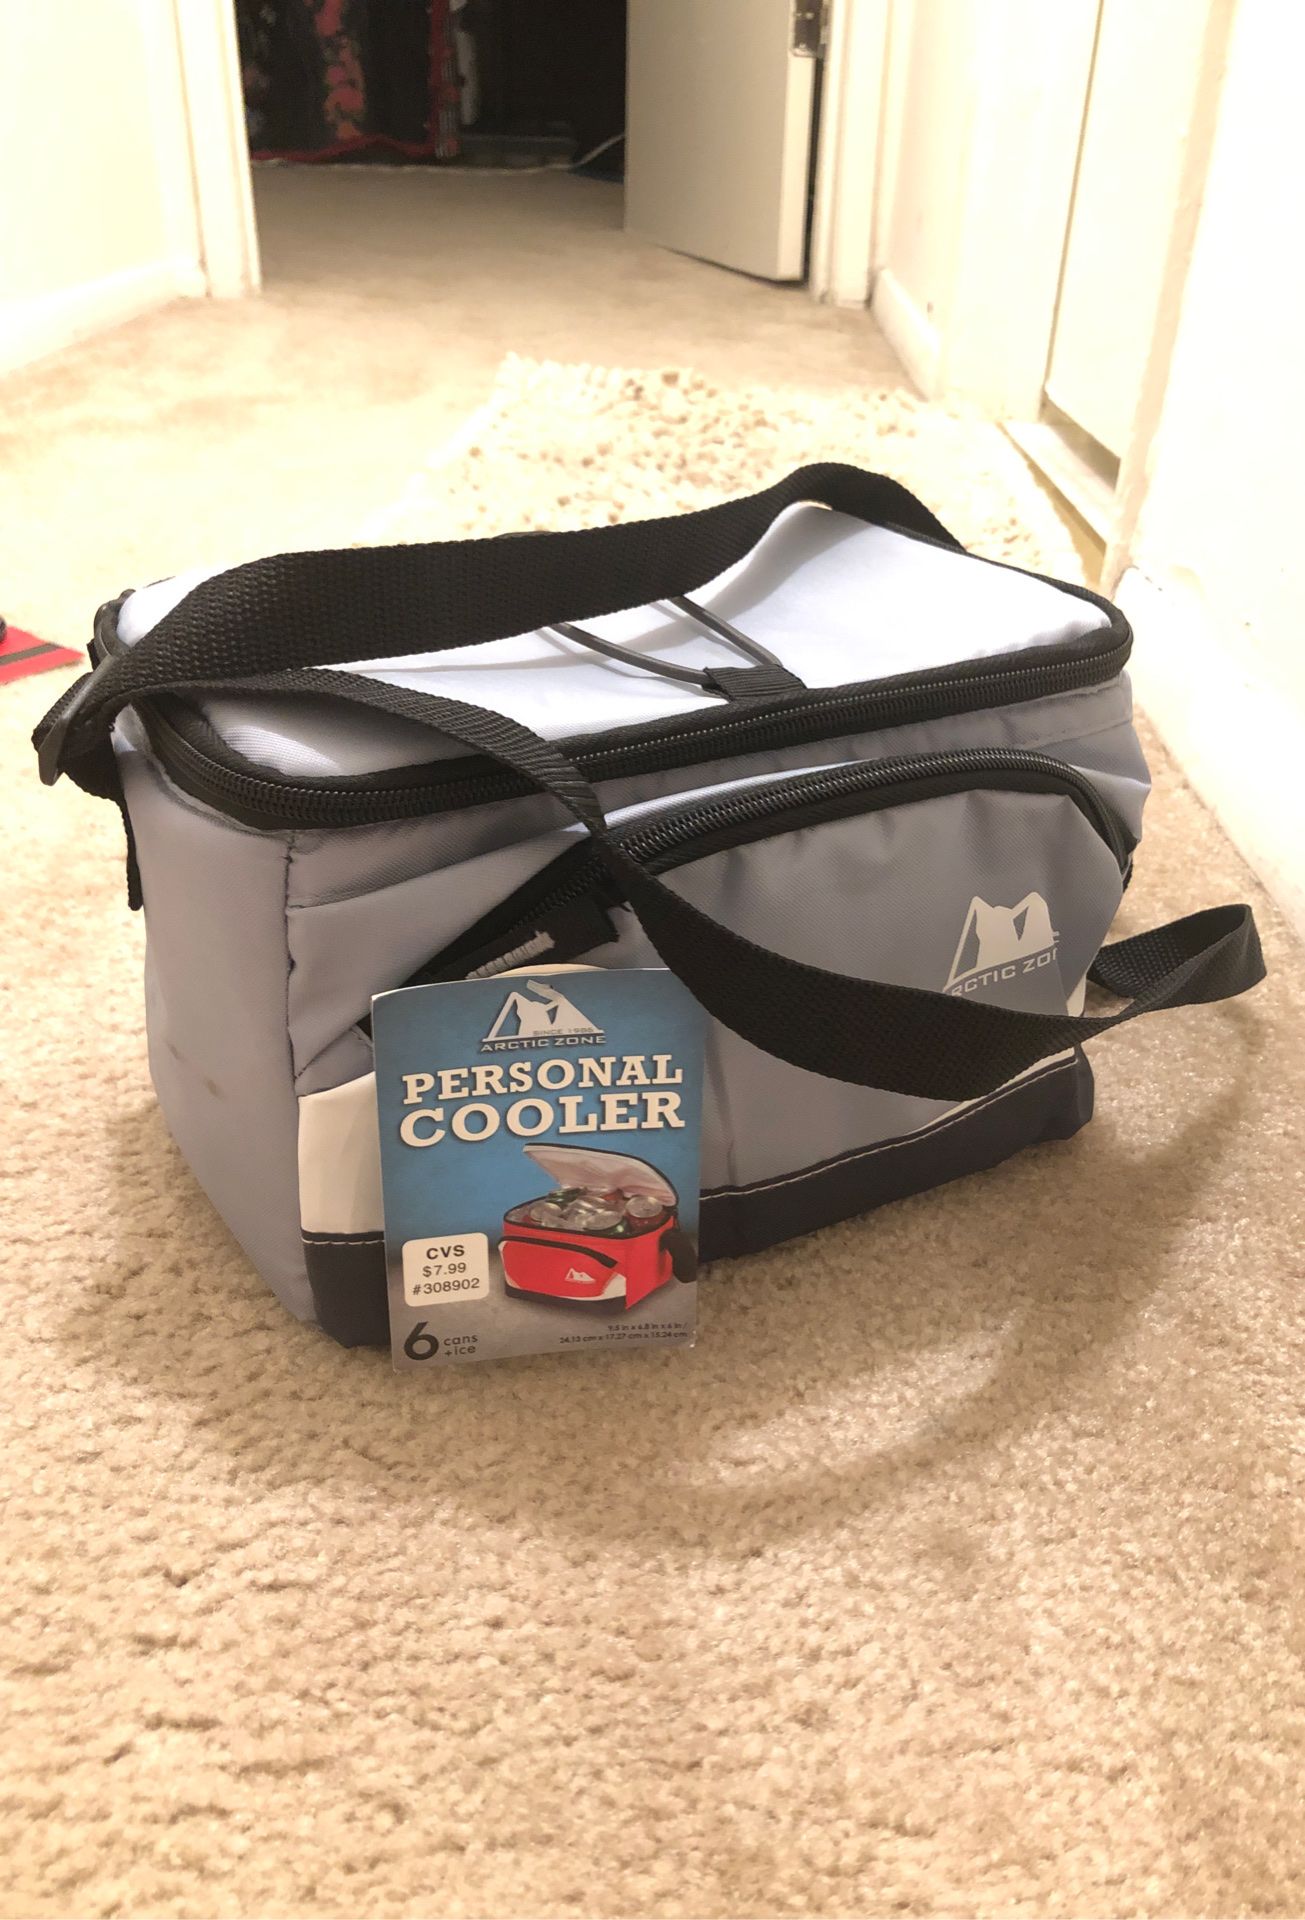 Personal cooler (Arctic zone Company)